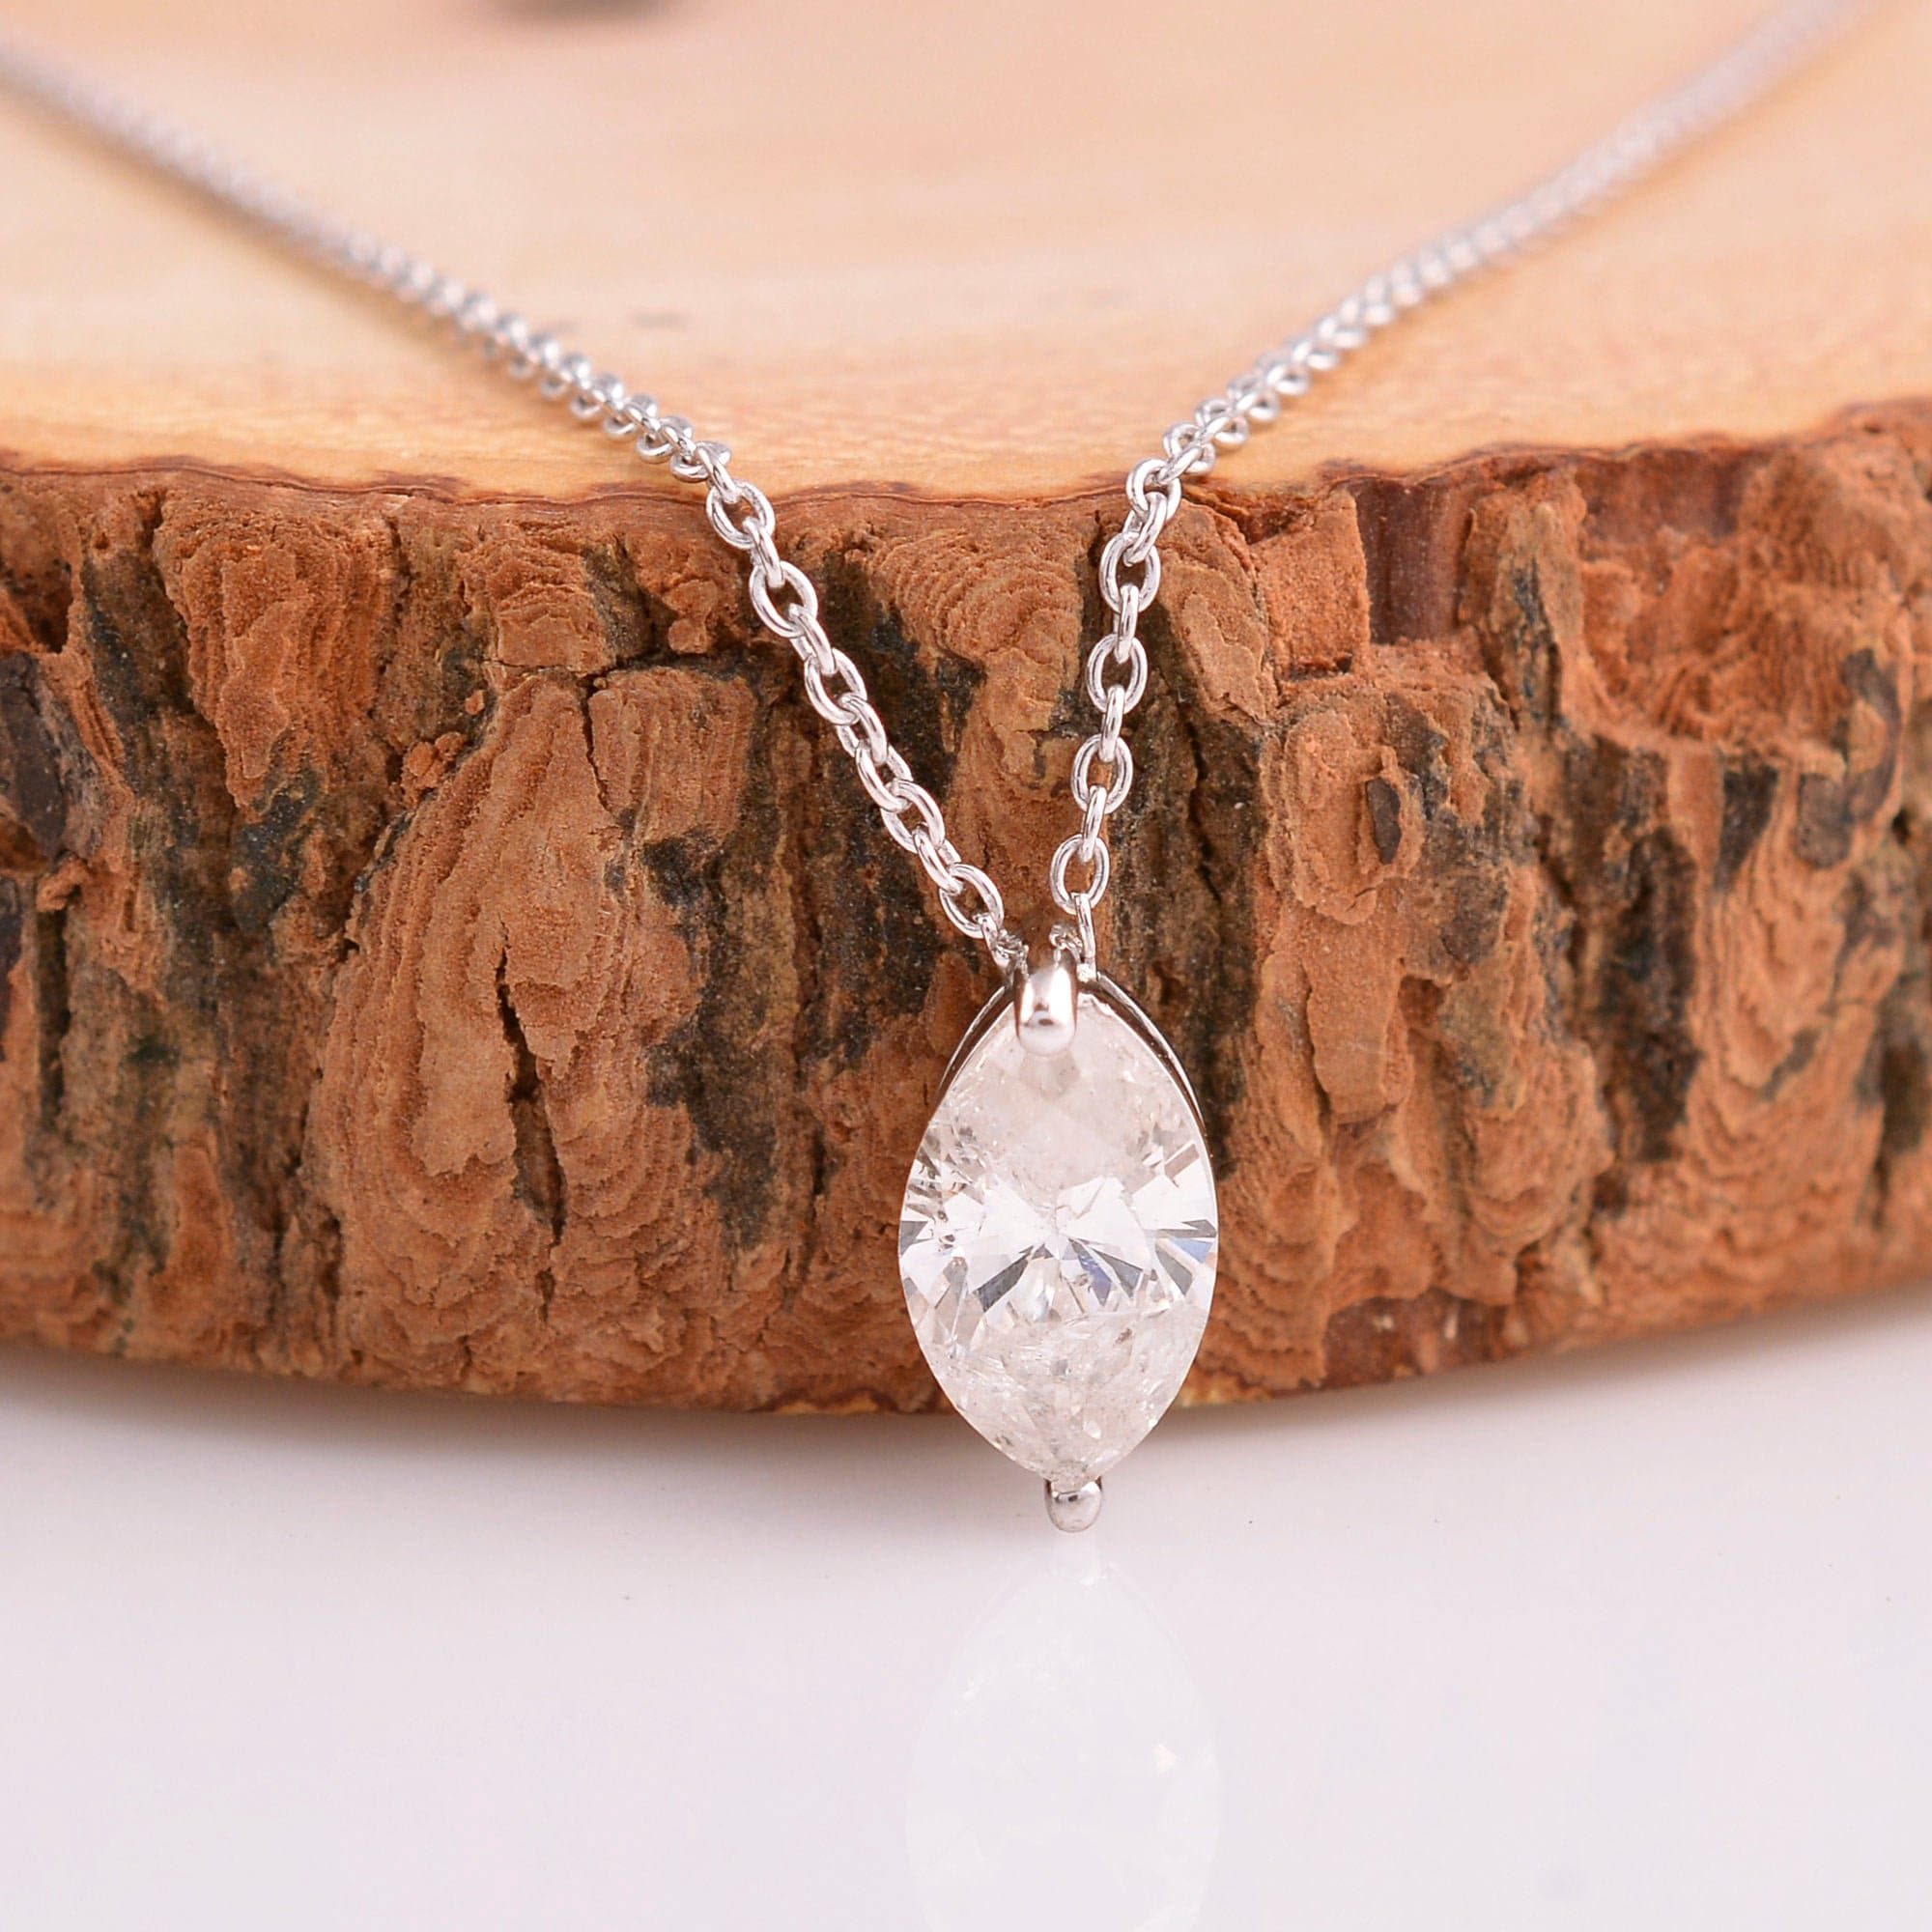 On Sale Diamond Necklace/0.91 Ct Single Piece Marquise Shape Solid 14K White Gold Fine Jewelry Birthday Gifts For Her